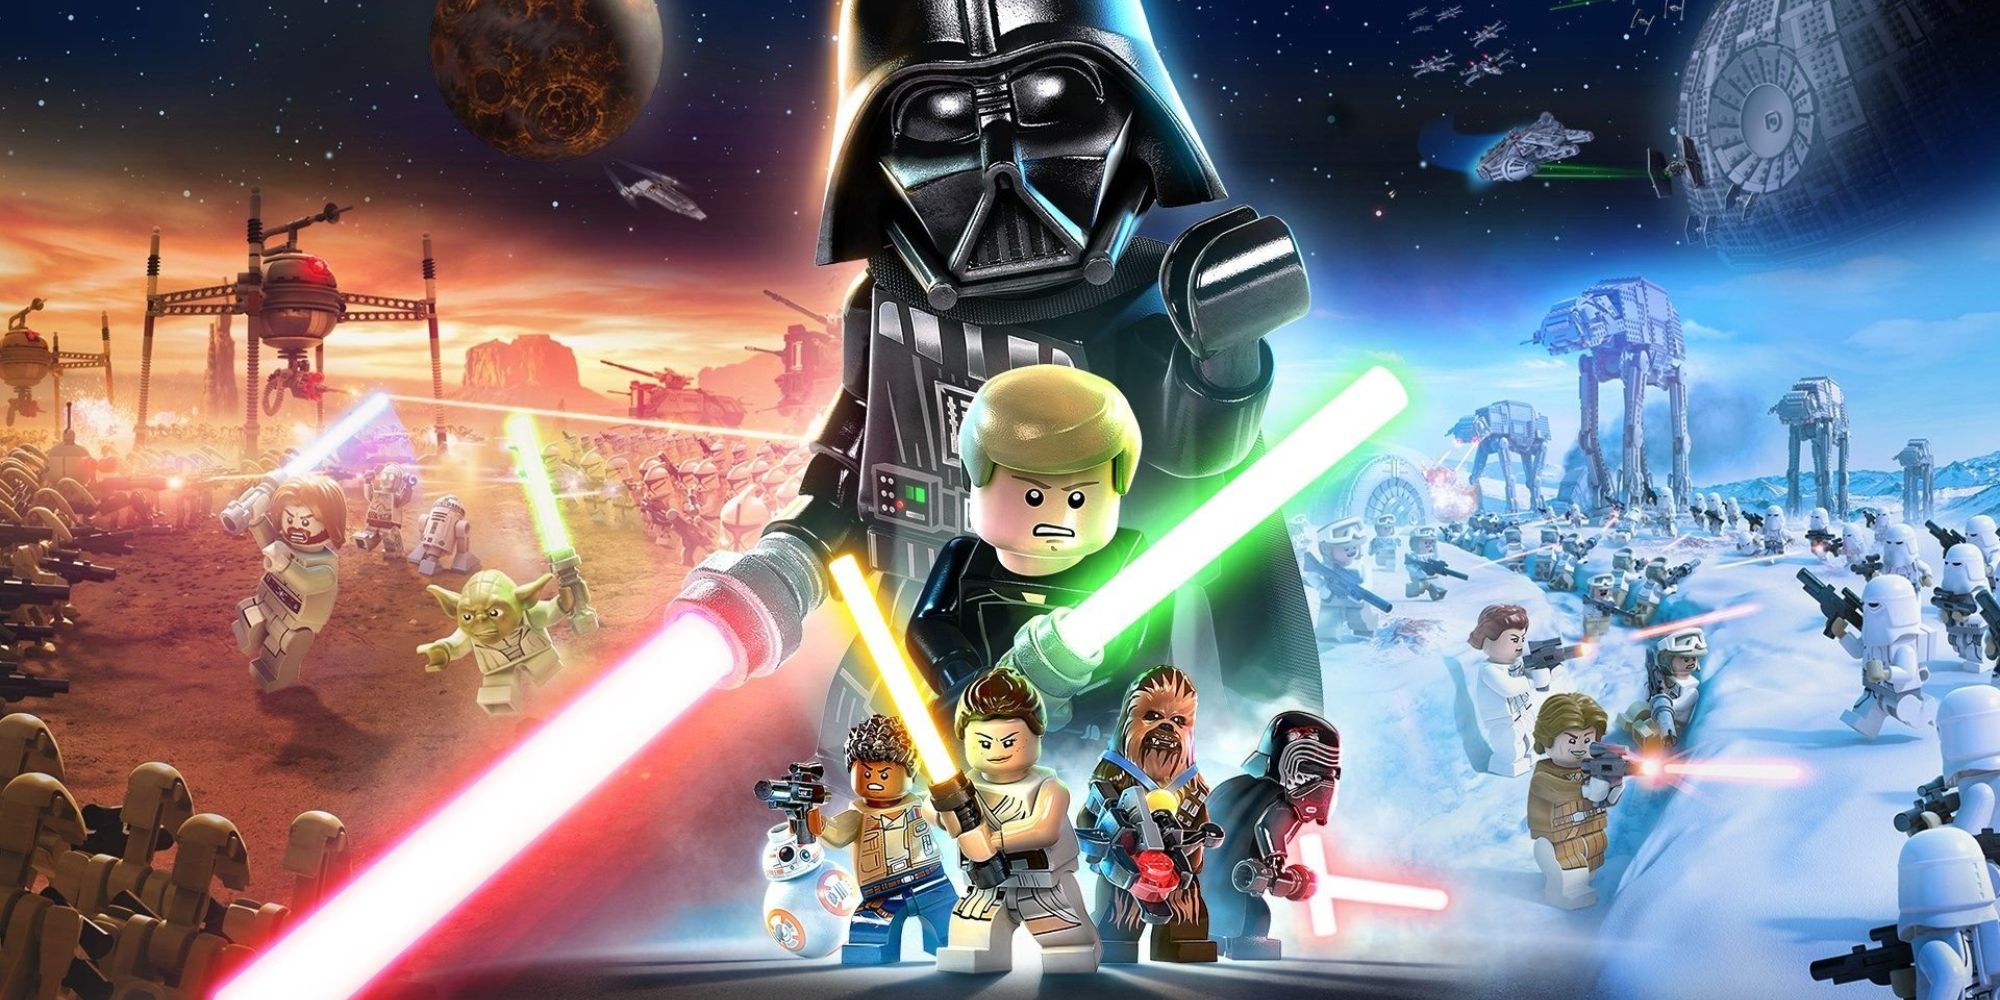 Lego Star Wars characters